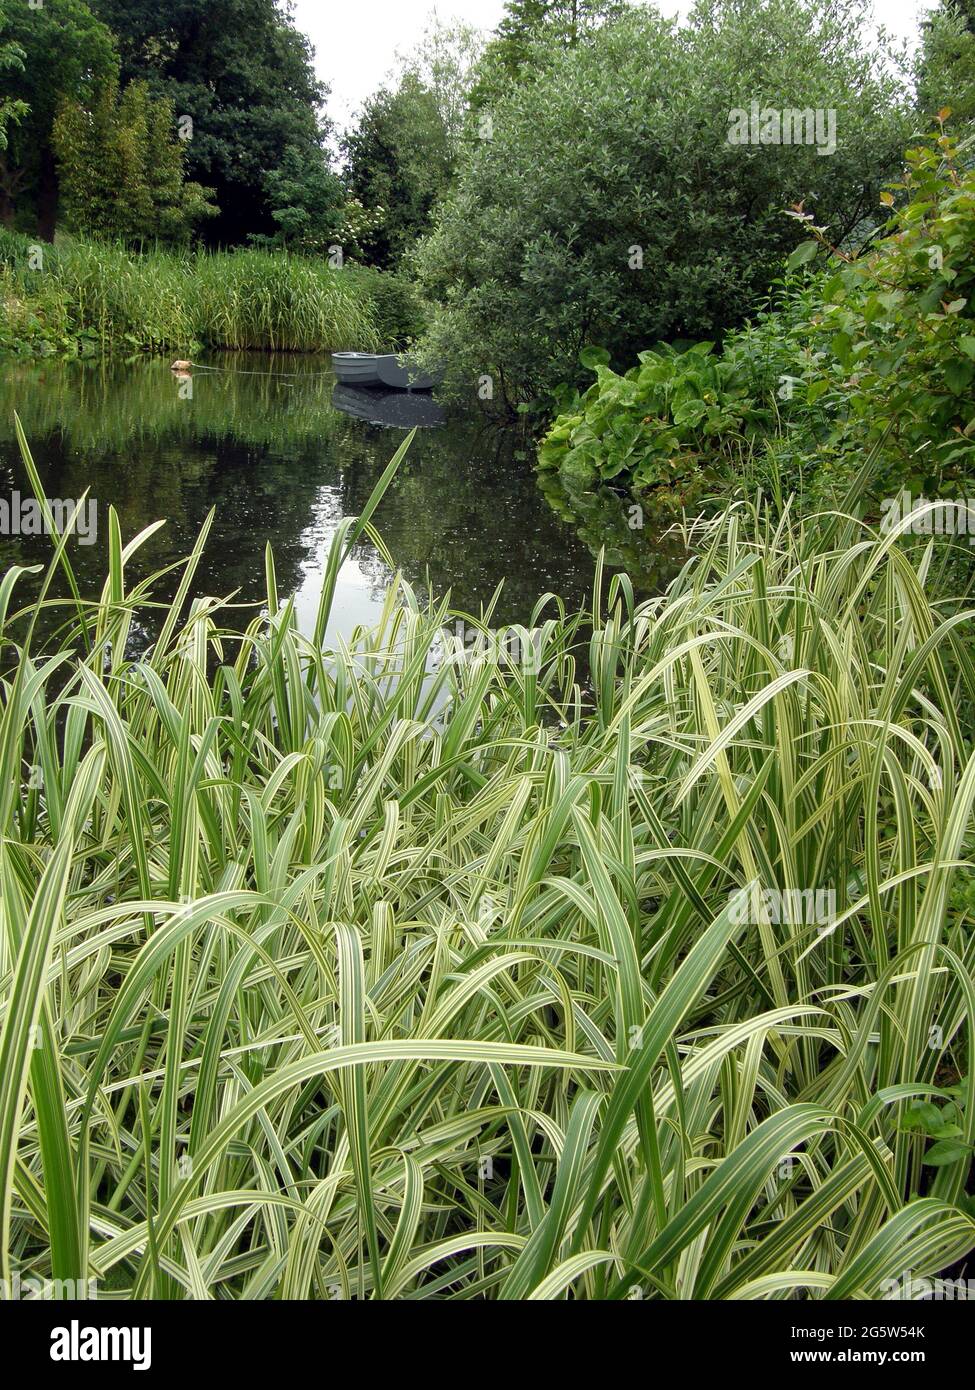 COLCHESTER, UK - 25 JUNE 2007: An ornamental variegated reed sweet-grass (Glyceria maxima Variegata) grows in a pond in the Beth Chatto garden Stock Photo